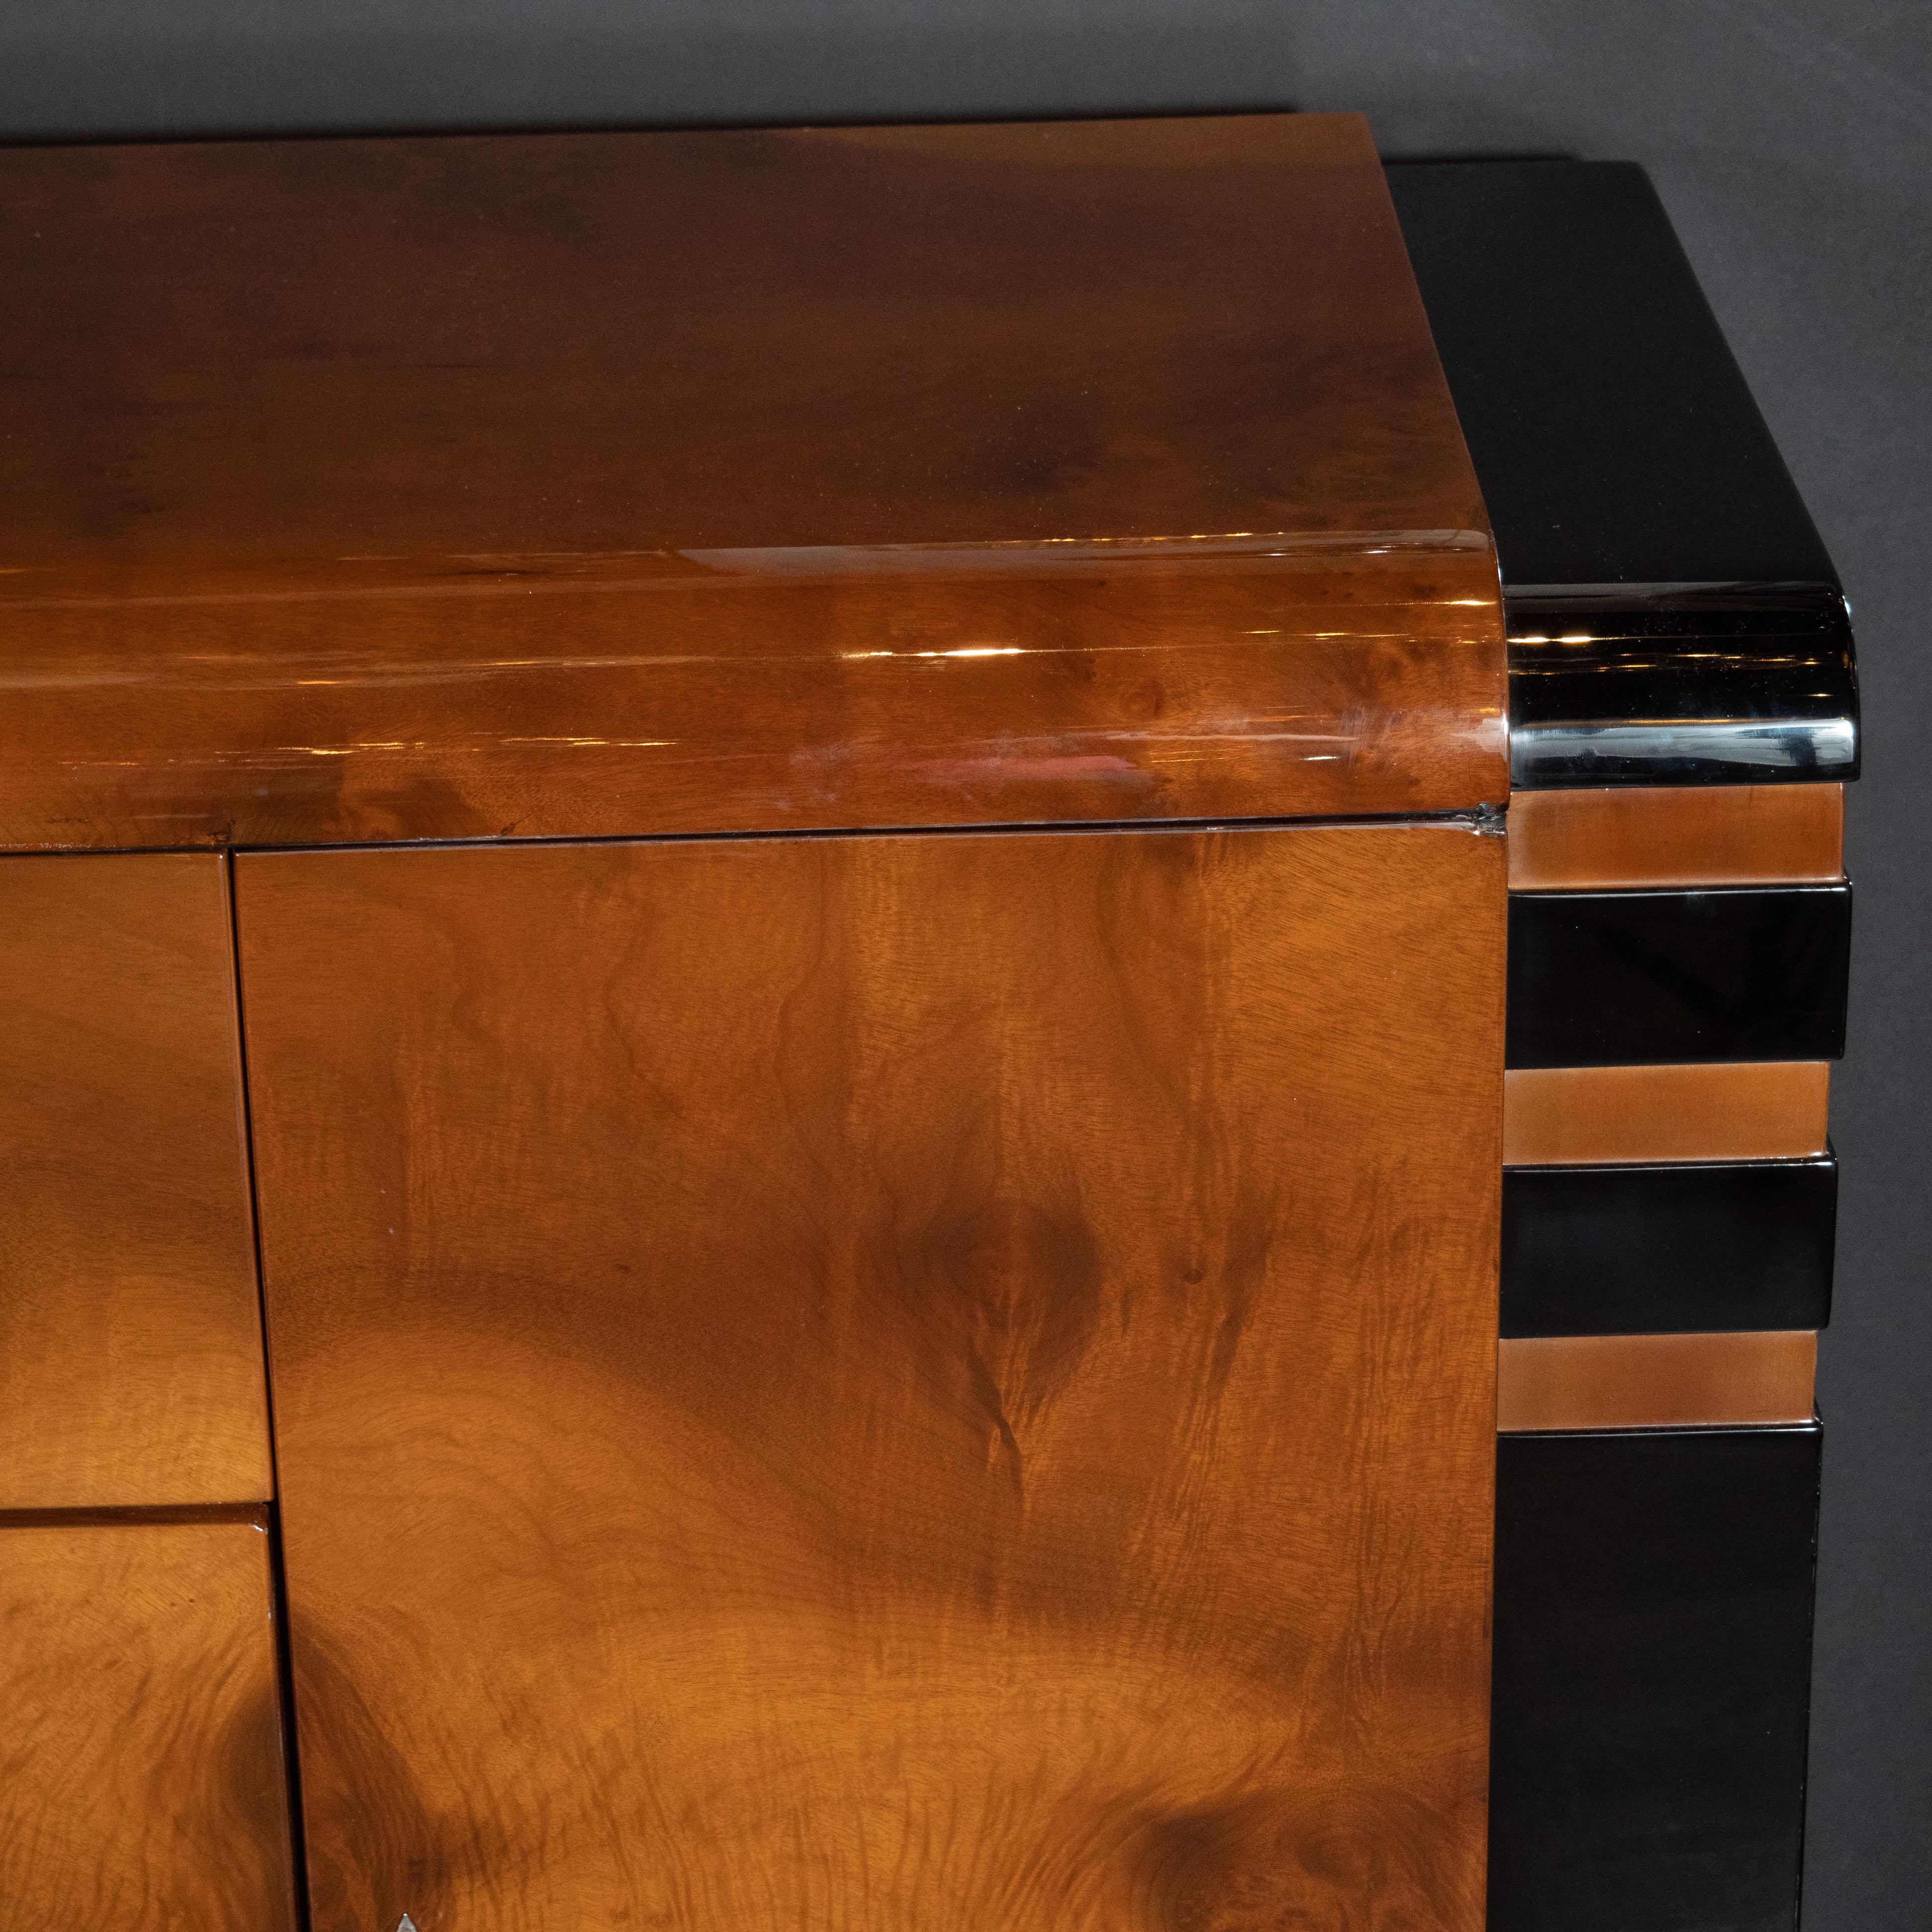 This stunning Art Deco Machine Age sideboard was designed by the 20th century luminary behind Radio City Music Hall, Donald Deskey, circa 1935. Executed in burled walnut- replete with a stunning natural grain- and black lacquer with brushed aluminum